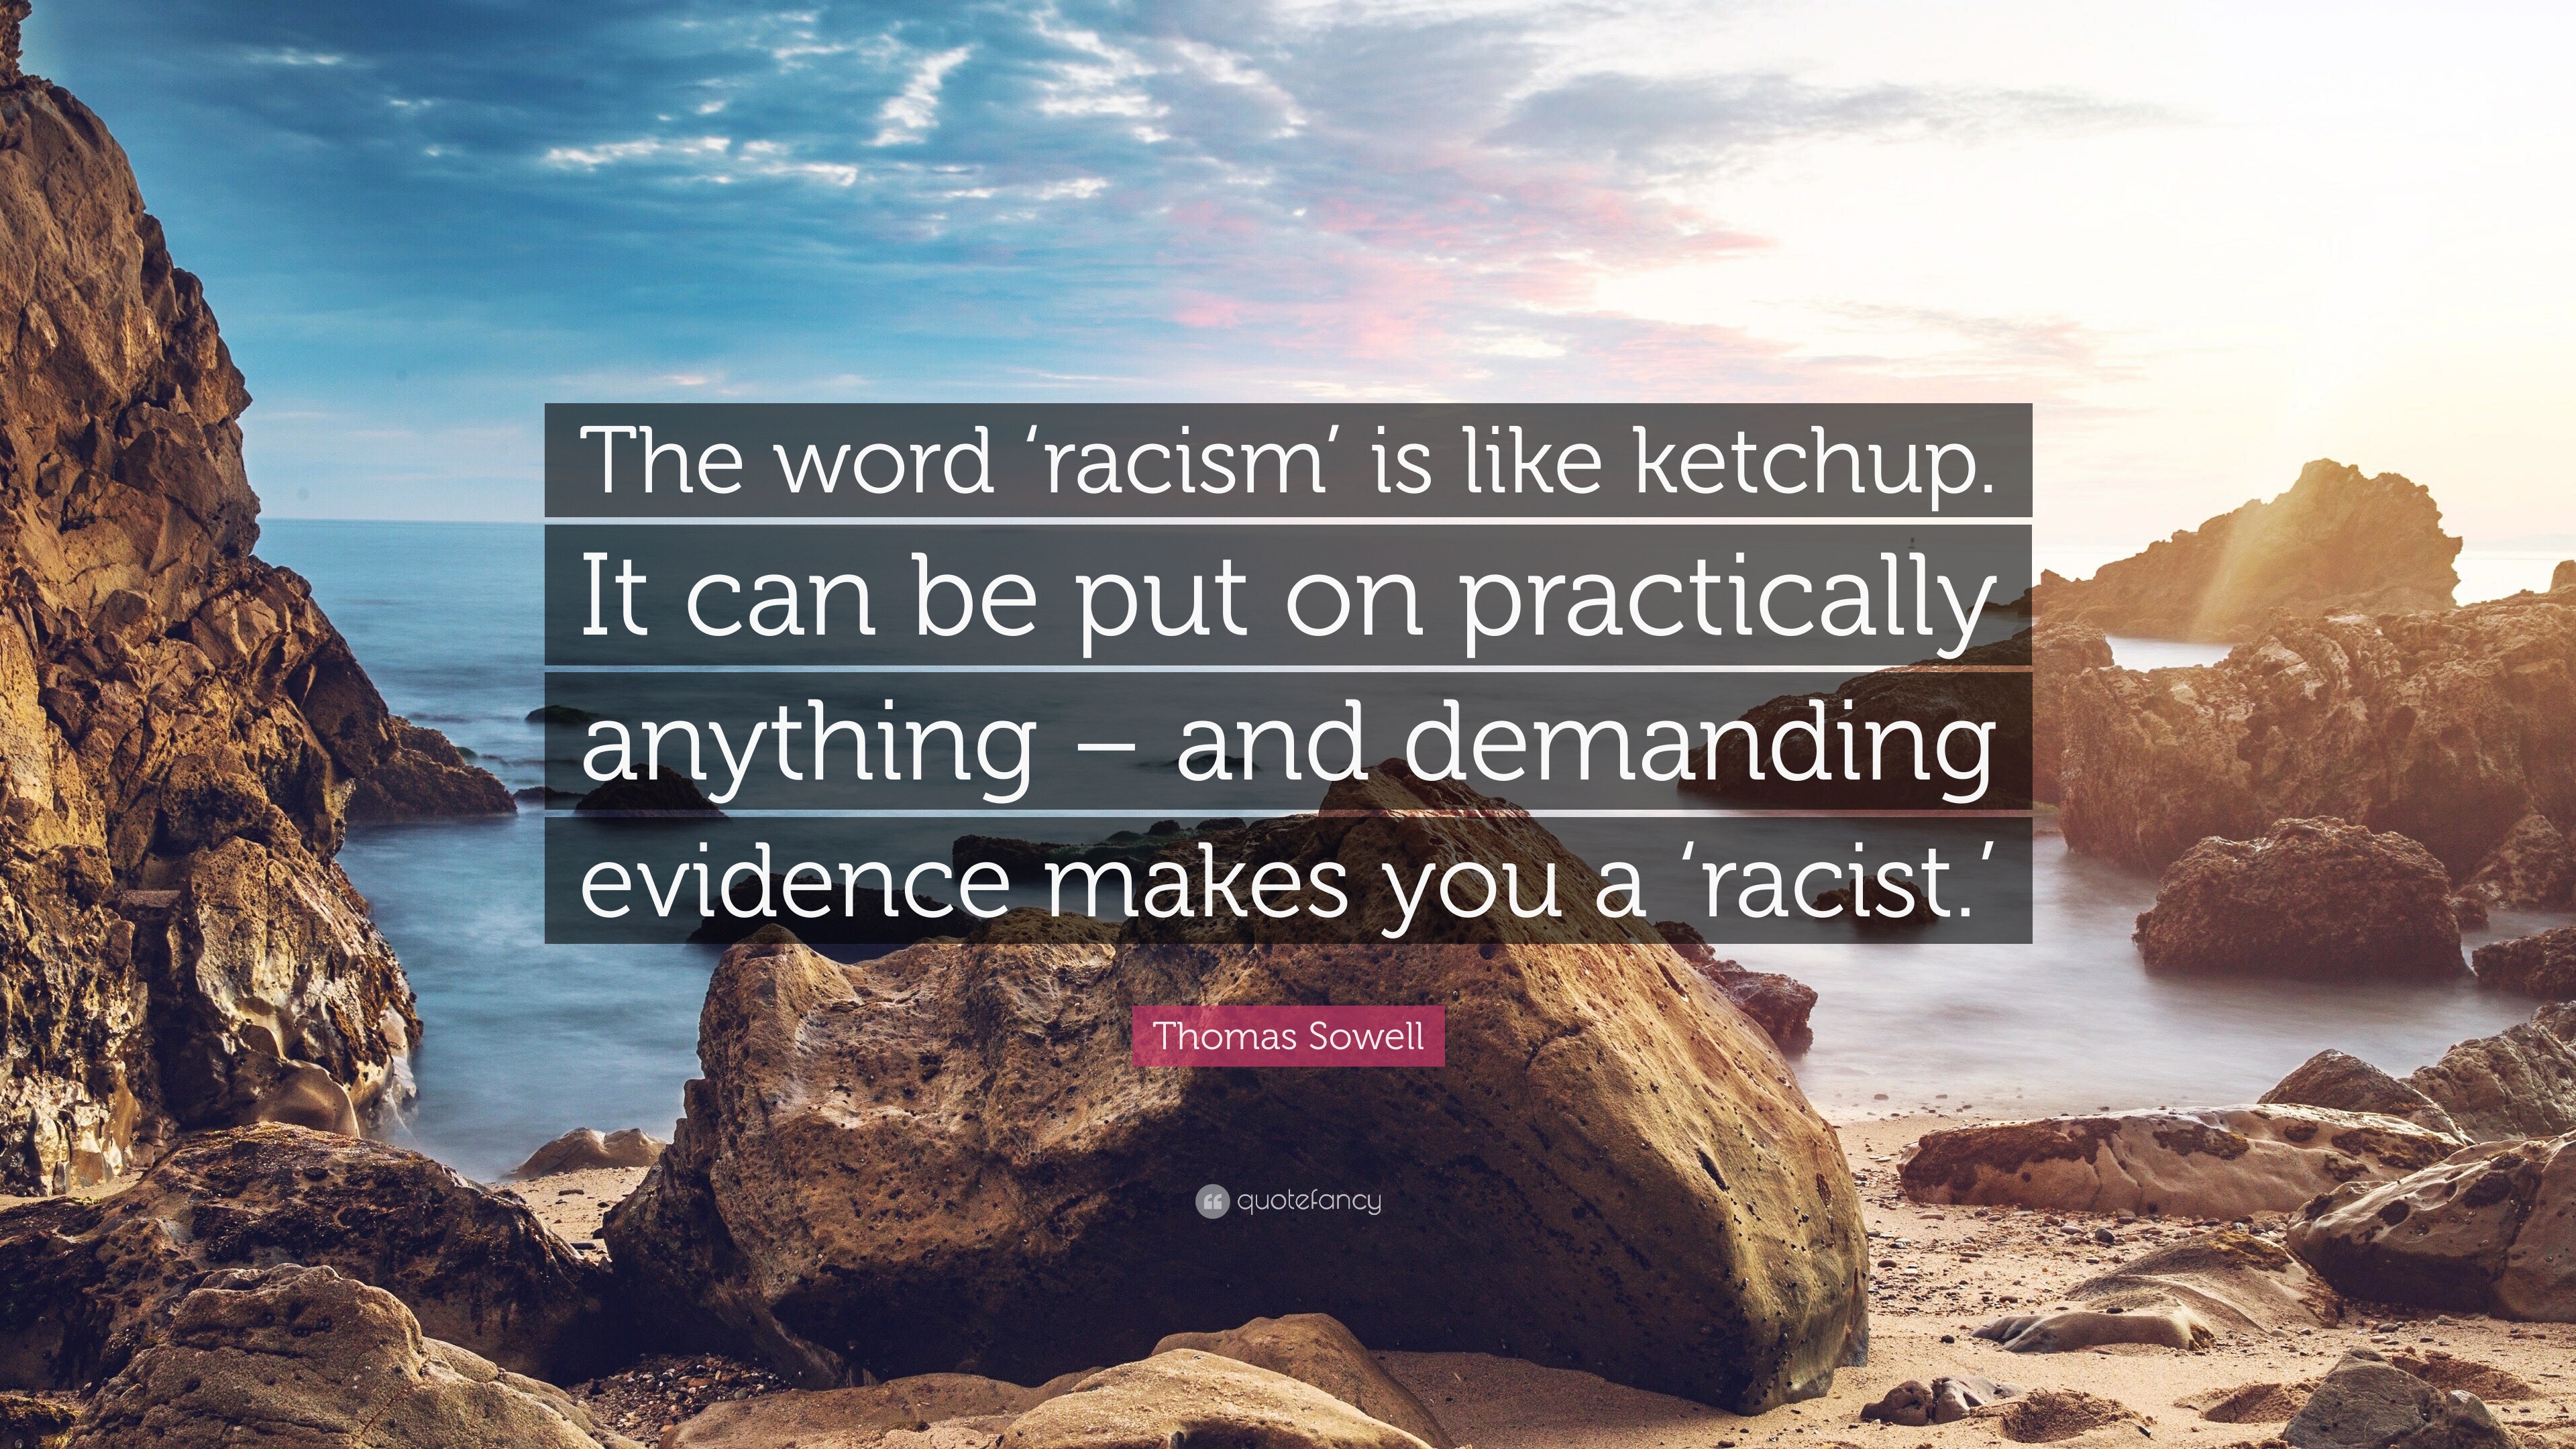 Thomas Sowell Quote: “The word ‘racism’ is like ketchup. It can be put ...